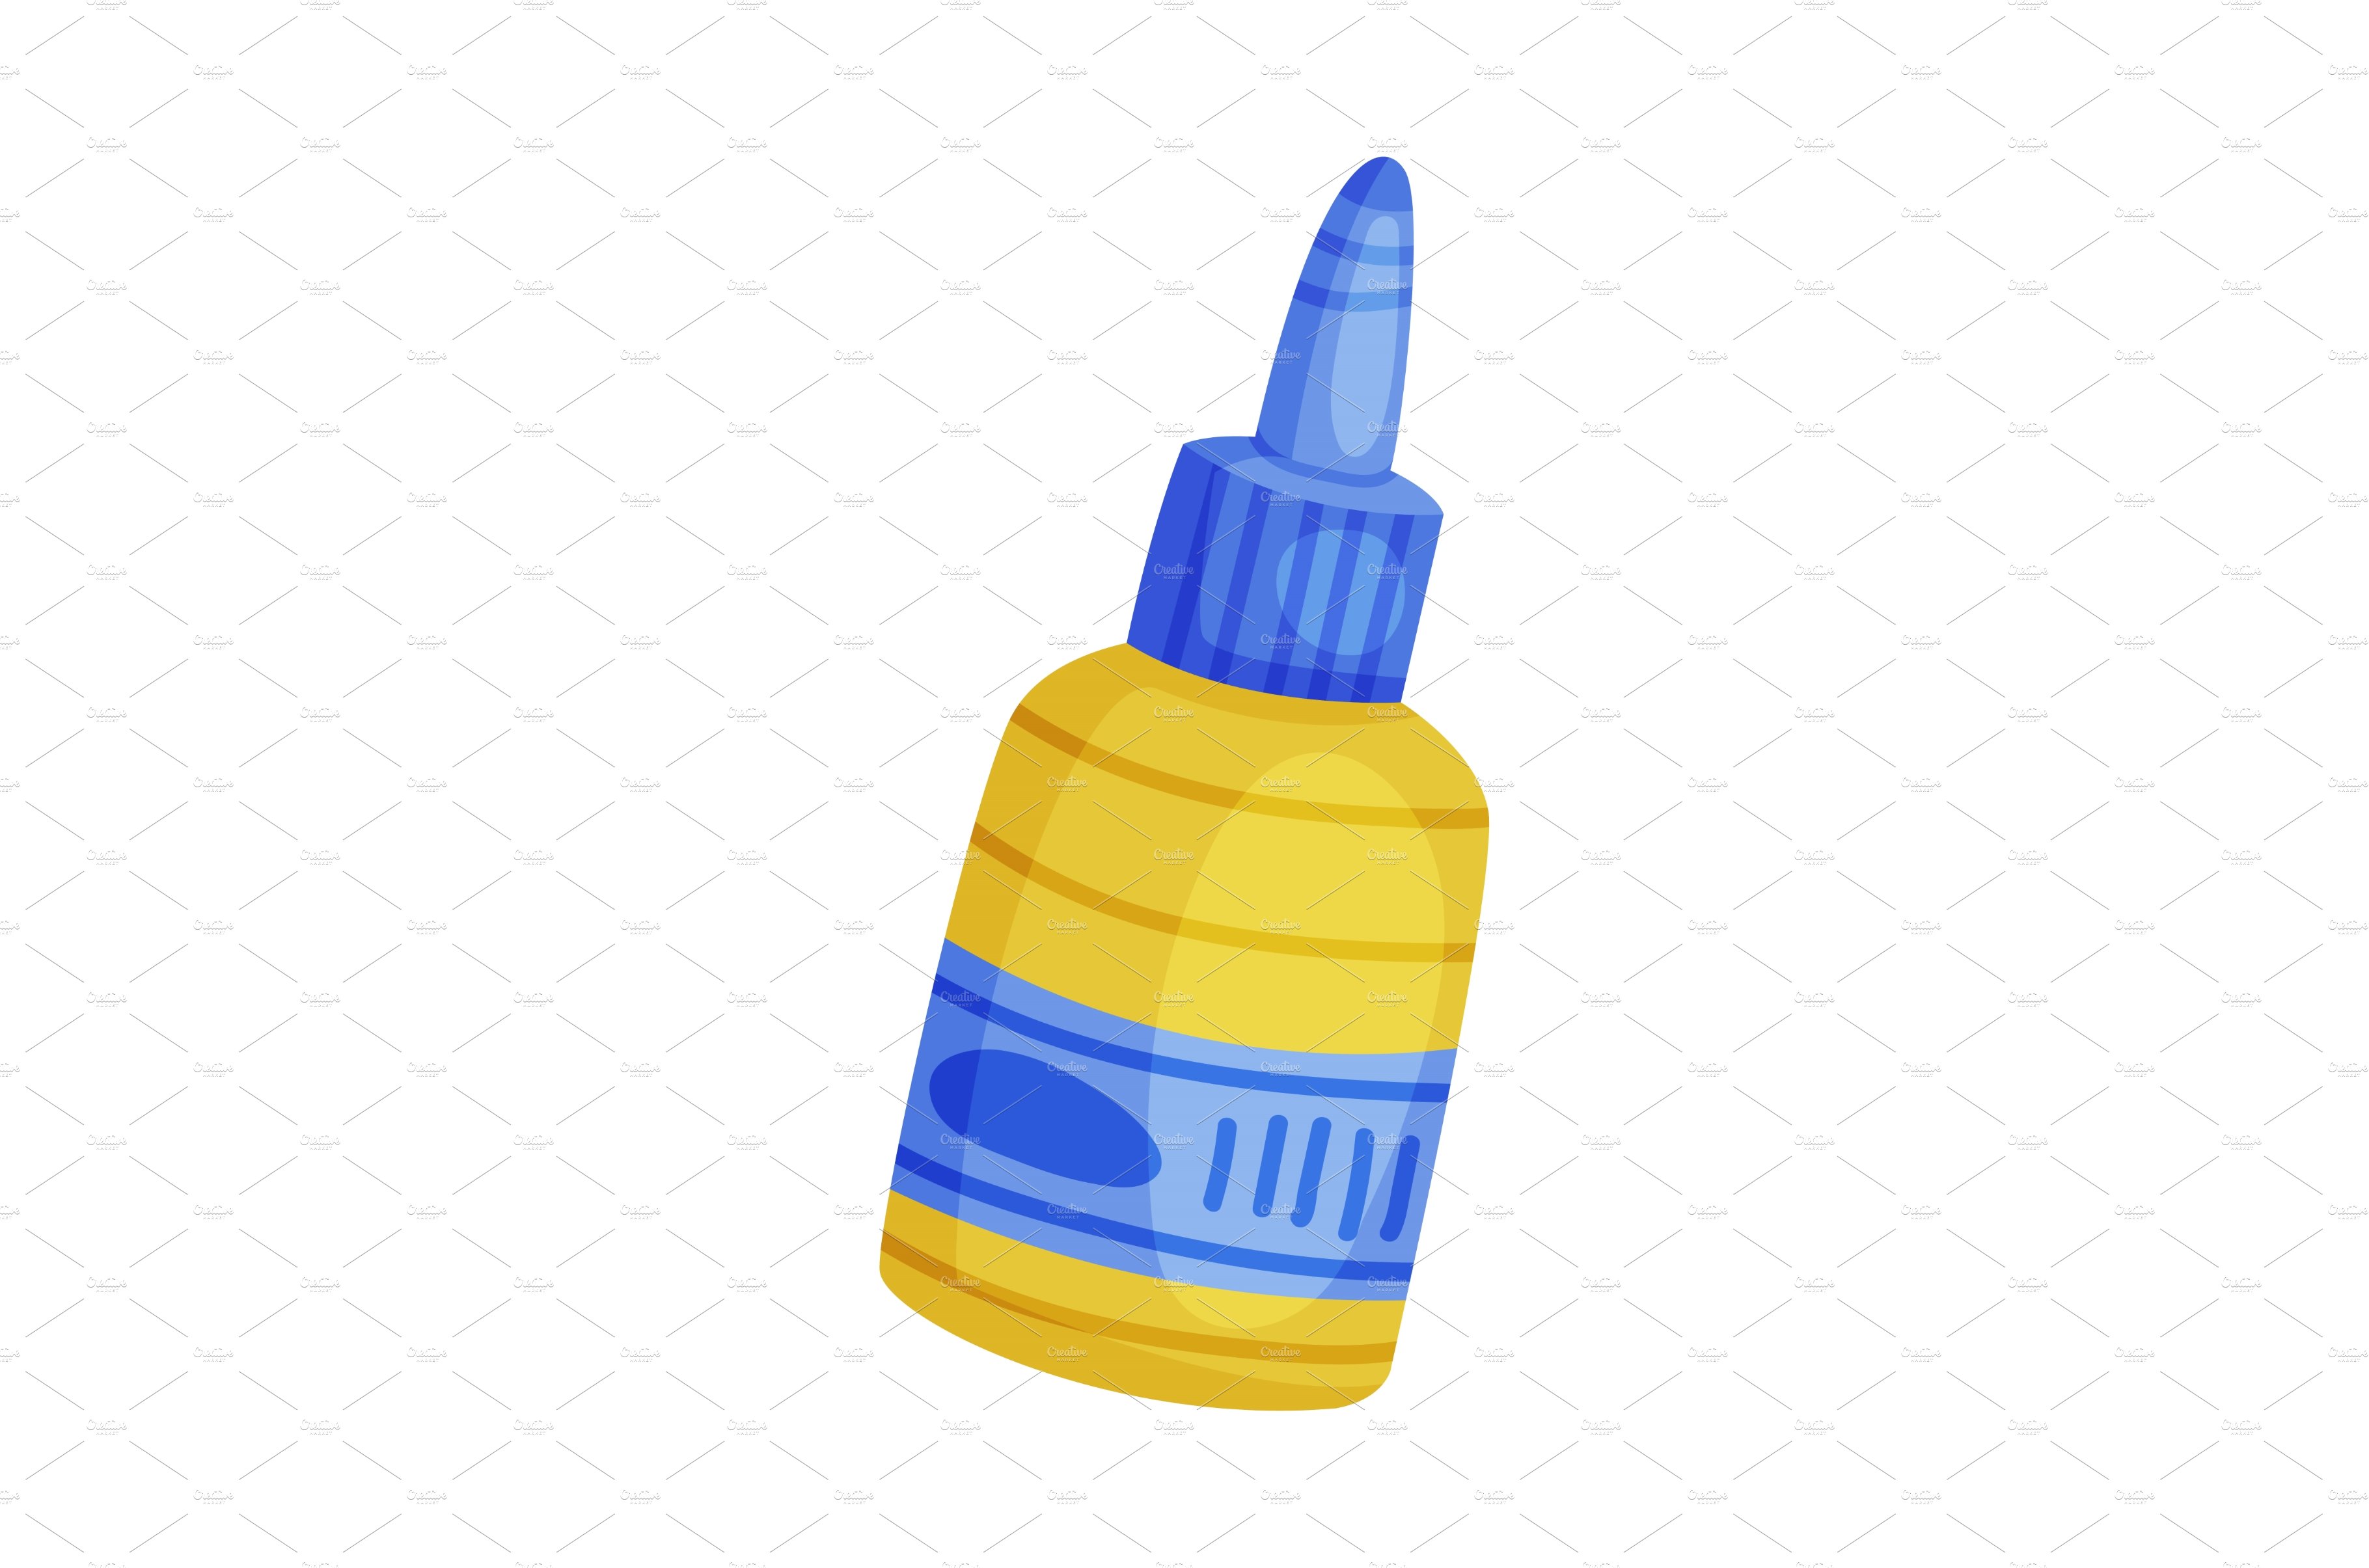 Adhesive or Glue in Yellow and Blue cover image.